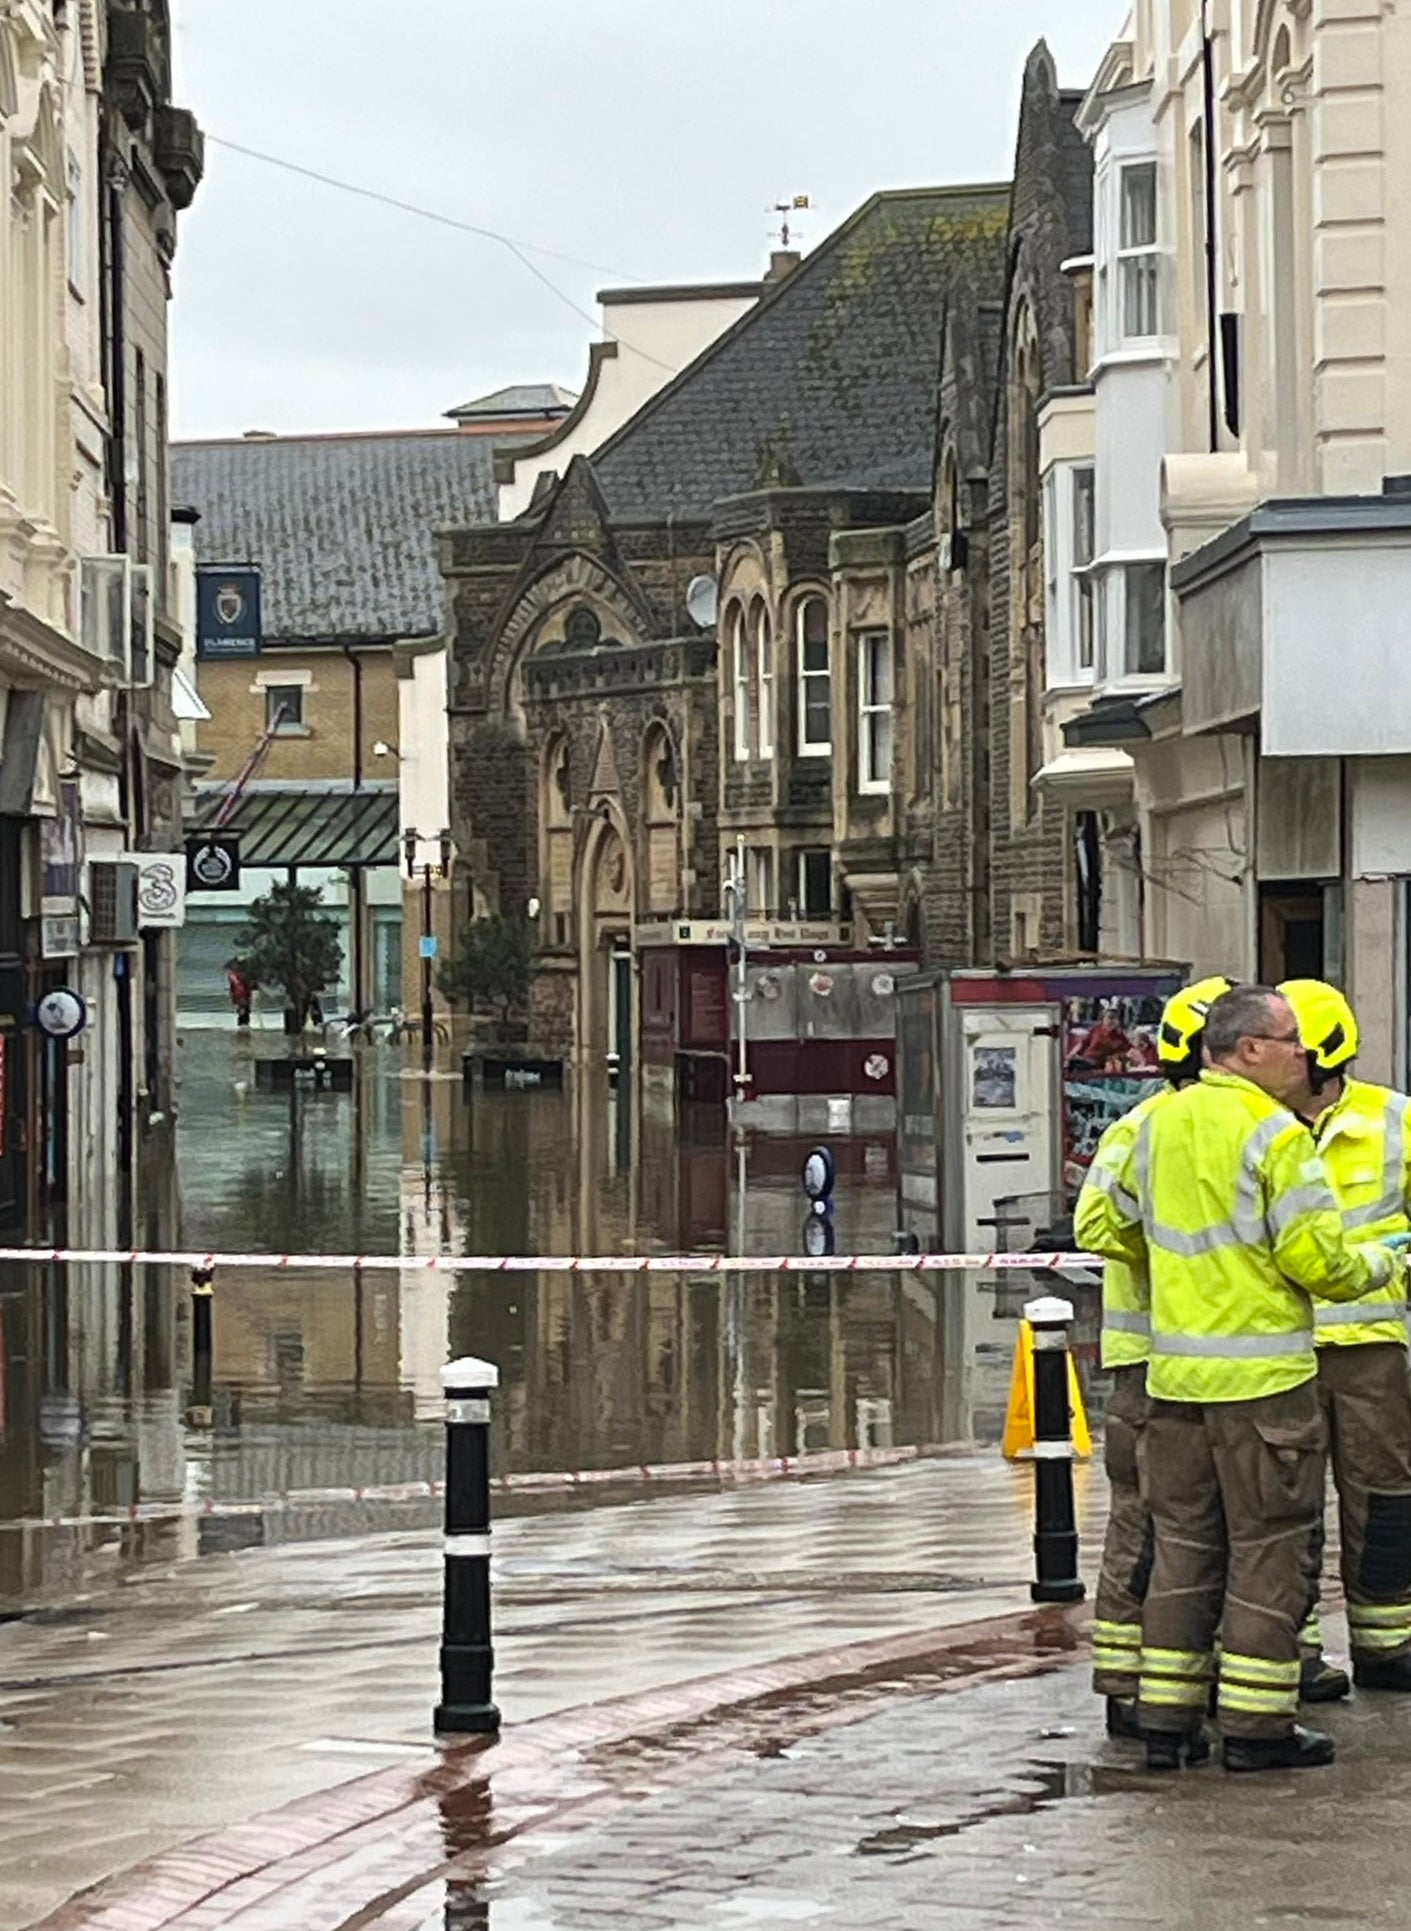 Emergency services were called in to deal with the flooding in Hastings